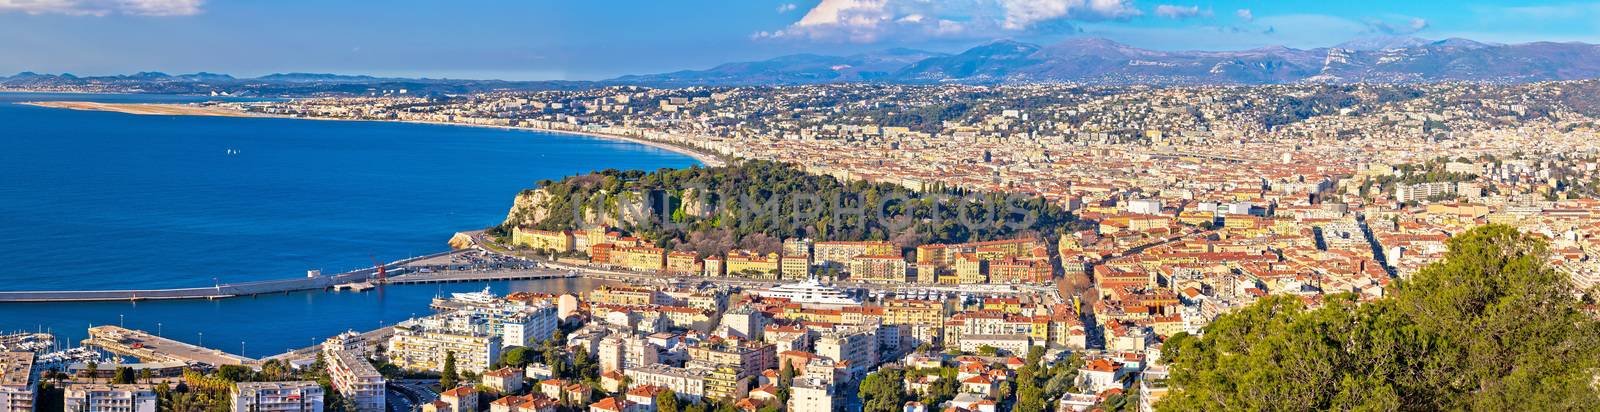 City of Nice waterfront aerial panoramic view, French riviera by xbrchx